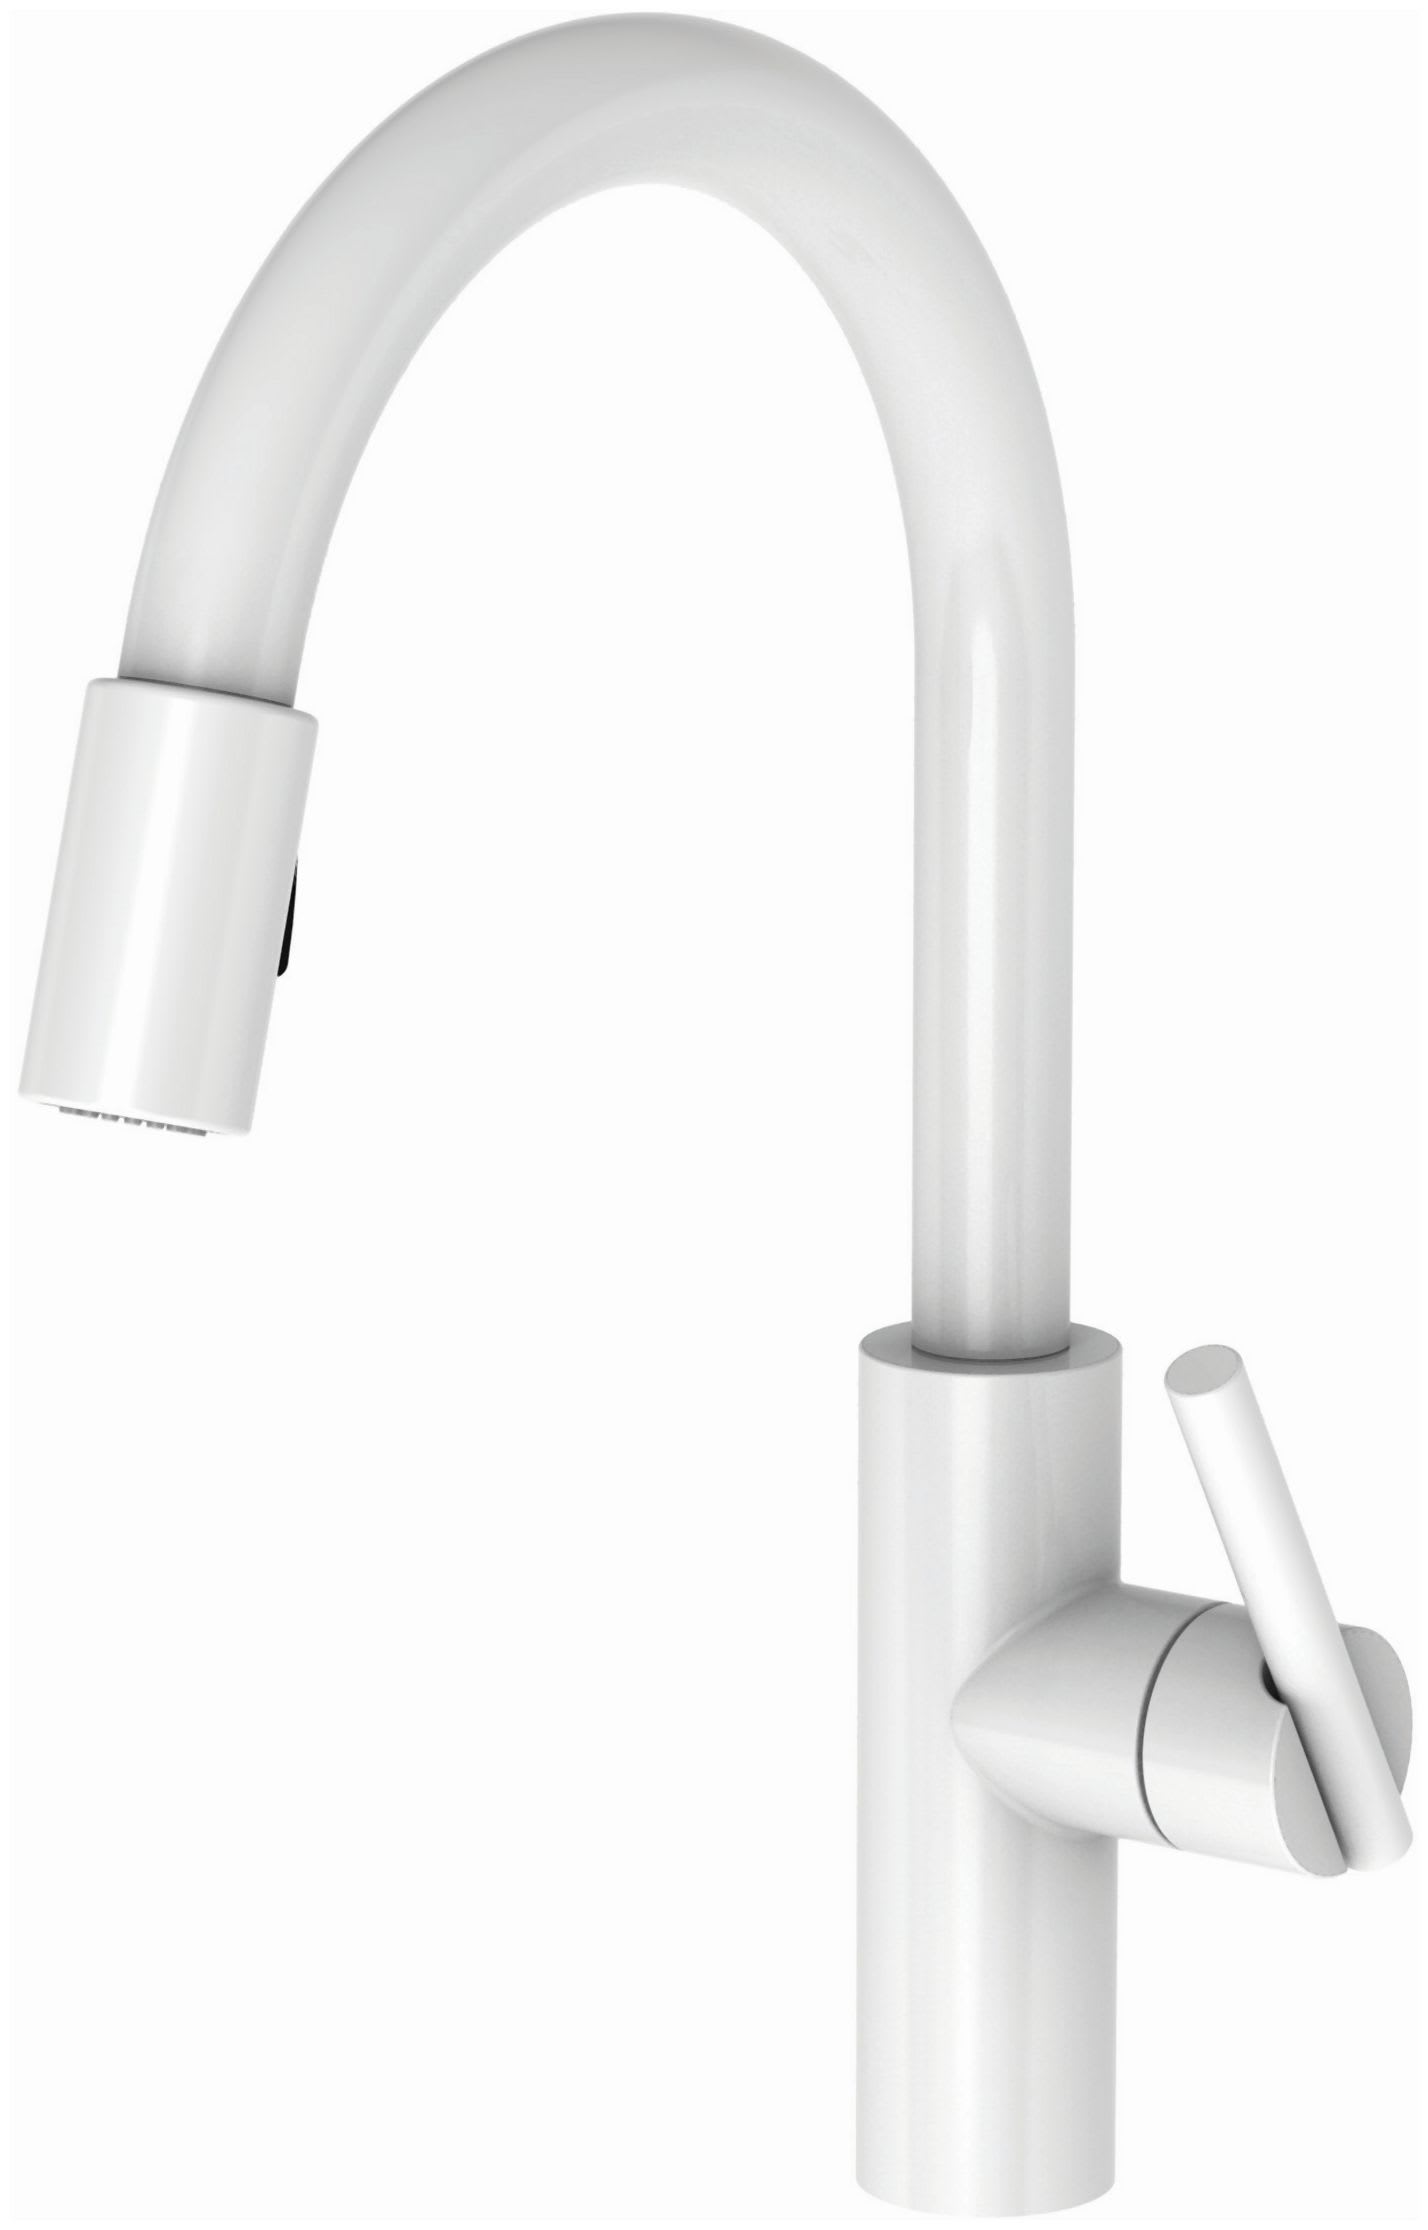 Newport Brass 1500-5103/50 White East Linear Pull-Down Spray Kitchen Faucet  with Magnetic Docking System